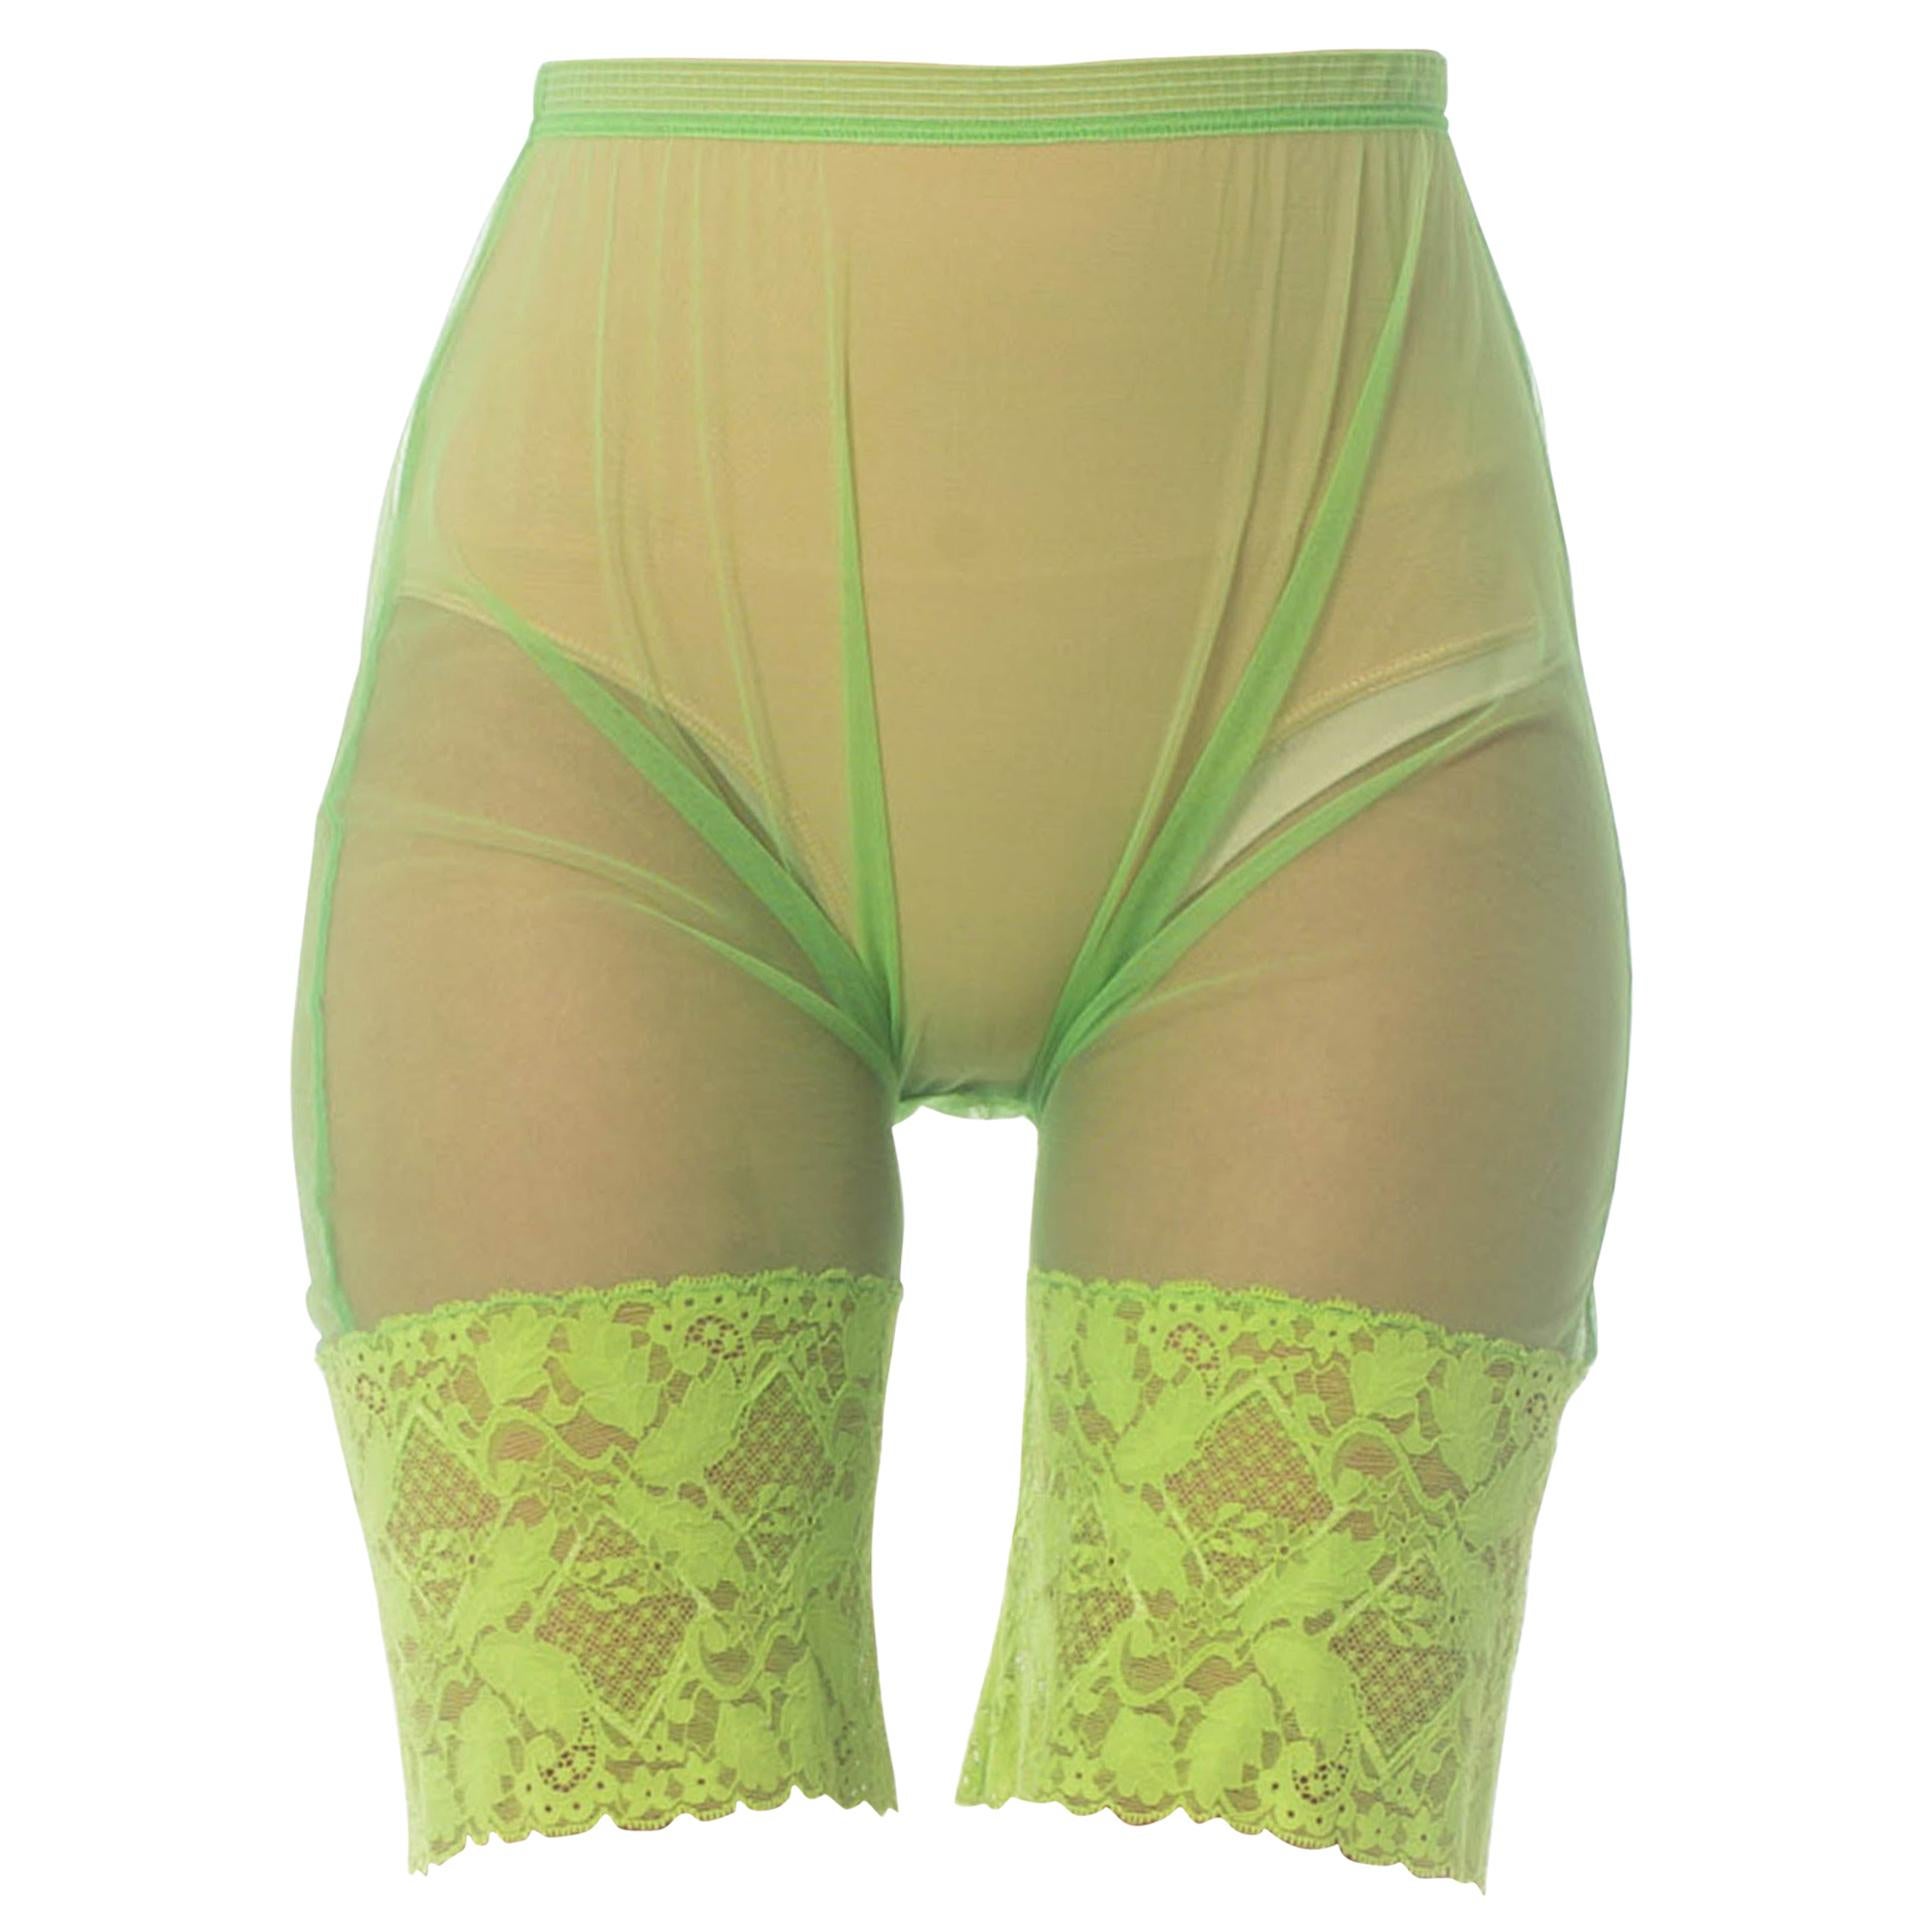 1990S GIANNI VERSACE Lime Green Nylon Net Sheer Bike Shorts With Lace Hem For Sale